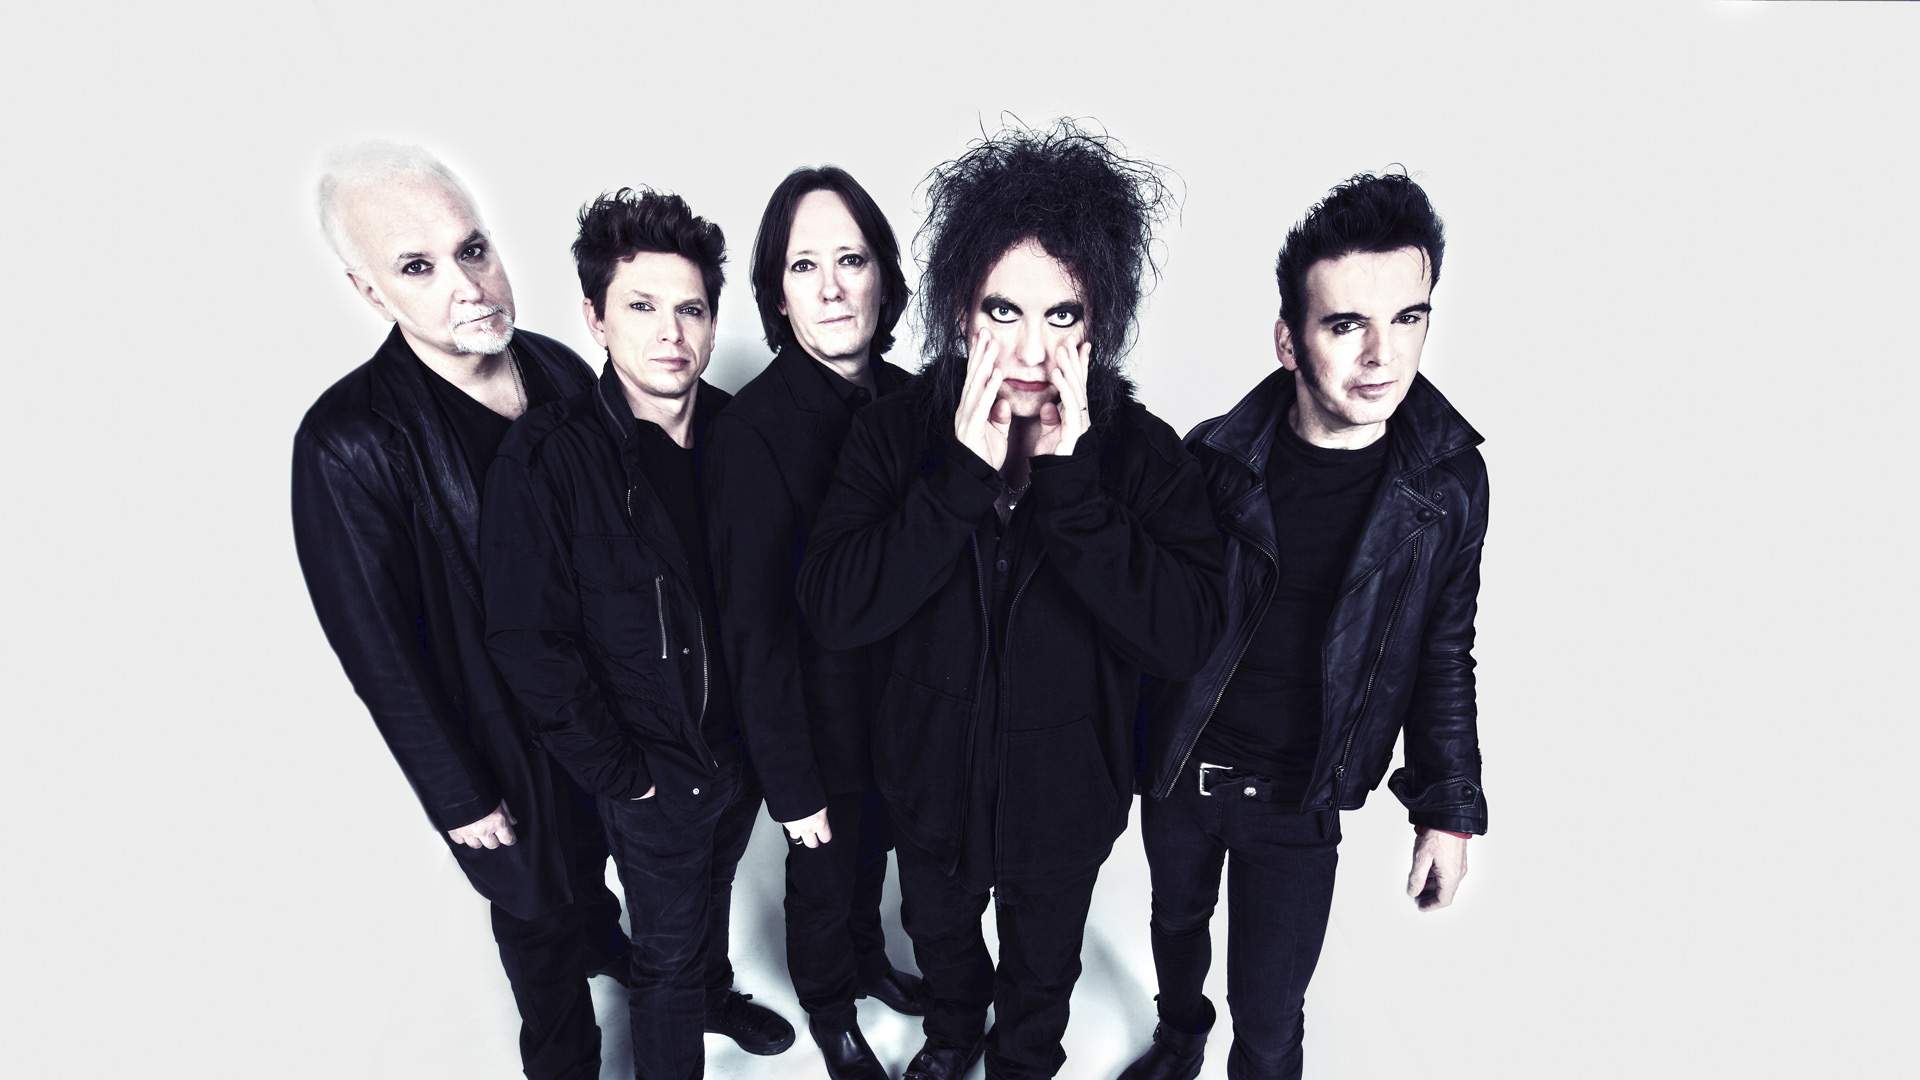 Legendary Post-Punk Band The Cure Has Announced Another Sydney Show